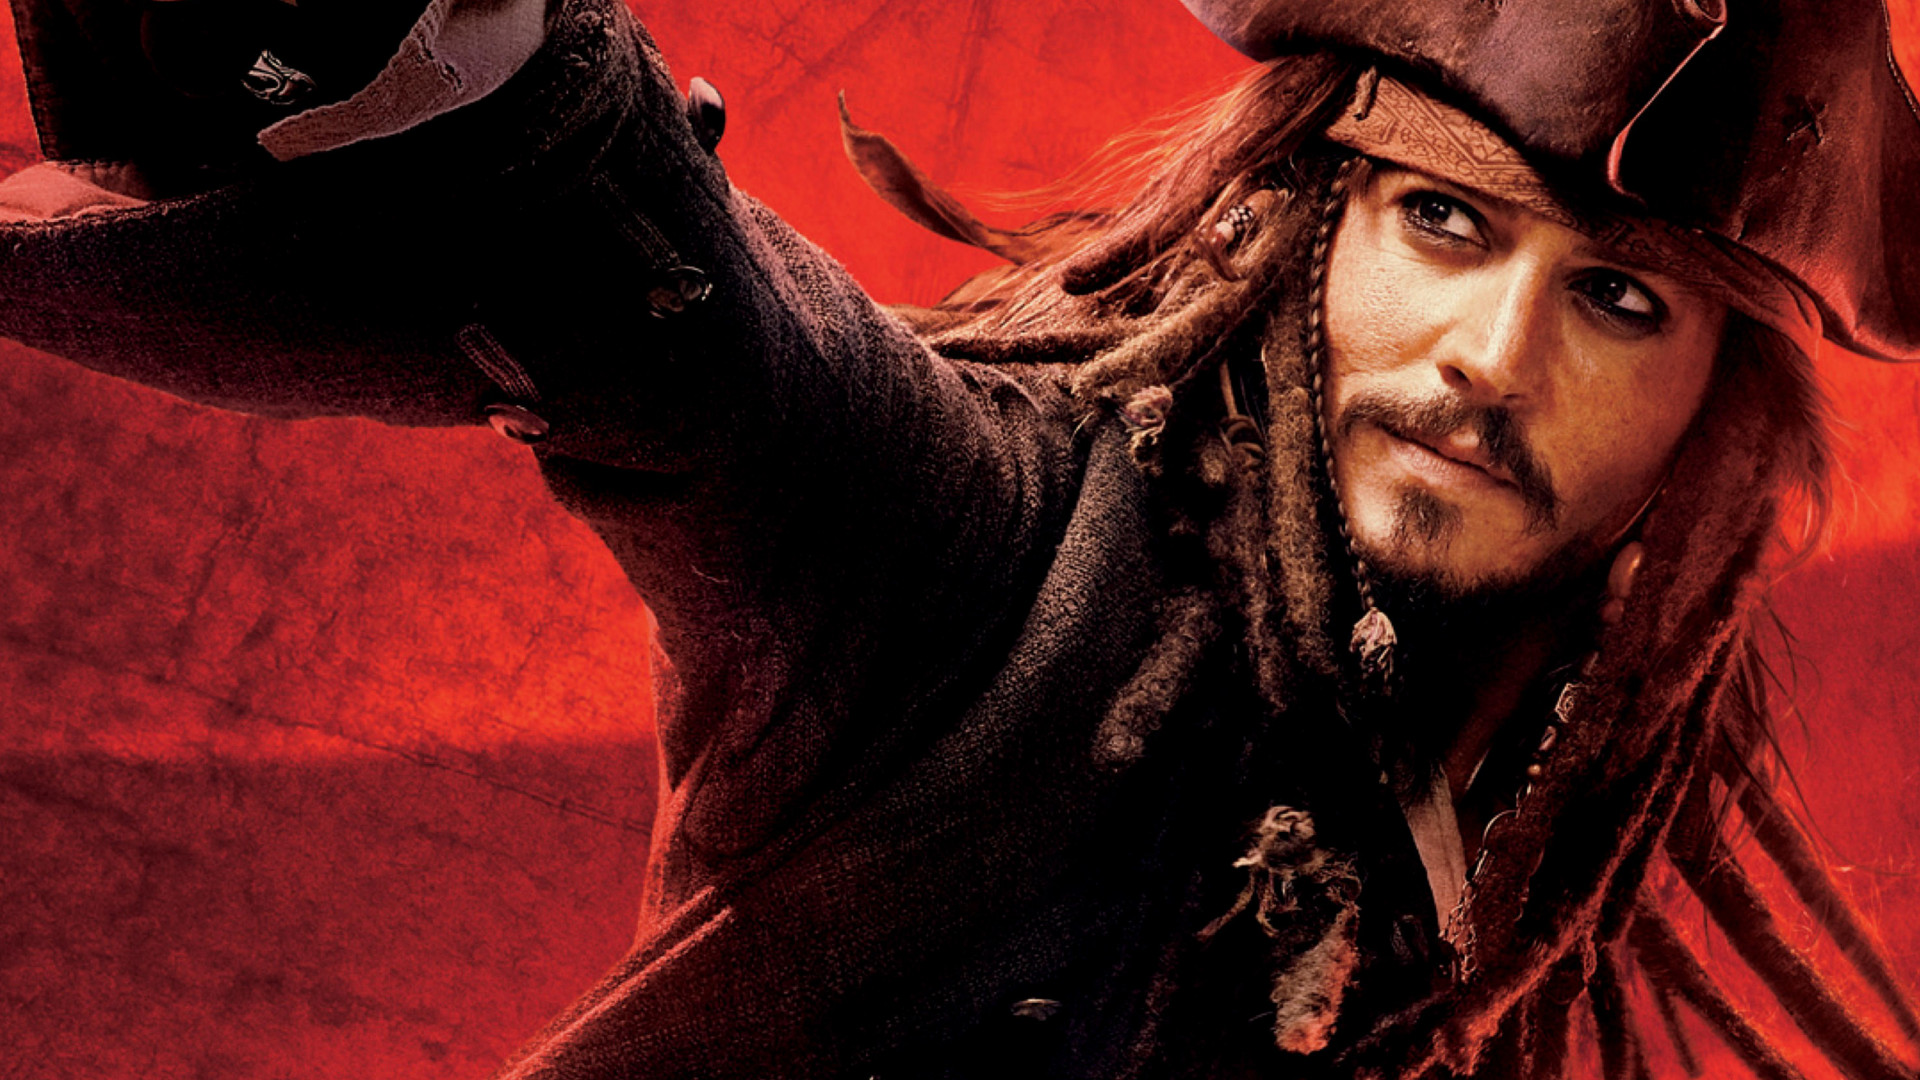 movie, pirates of the caribbean: at world's end, jack sparrow, johnny depp, pirates of the caribbean Full HD